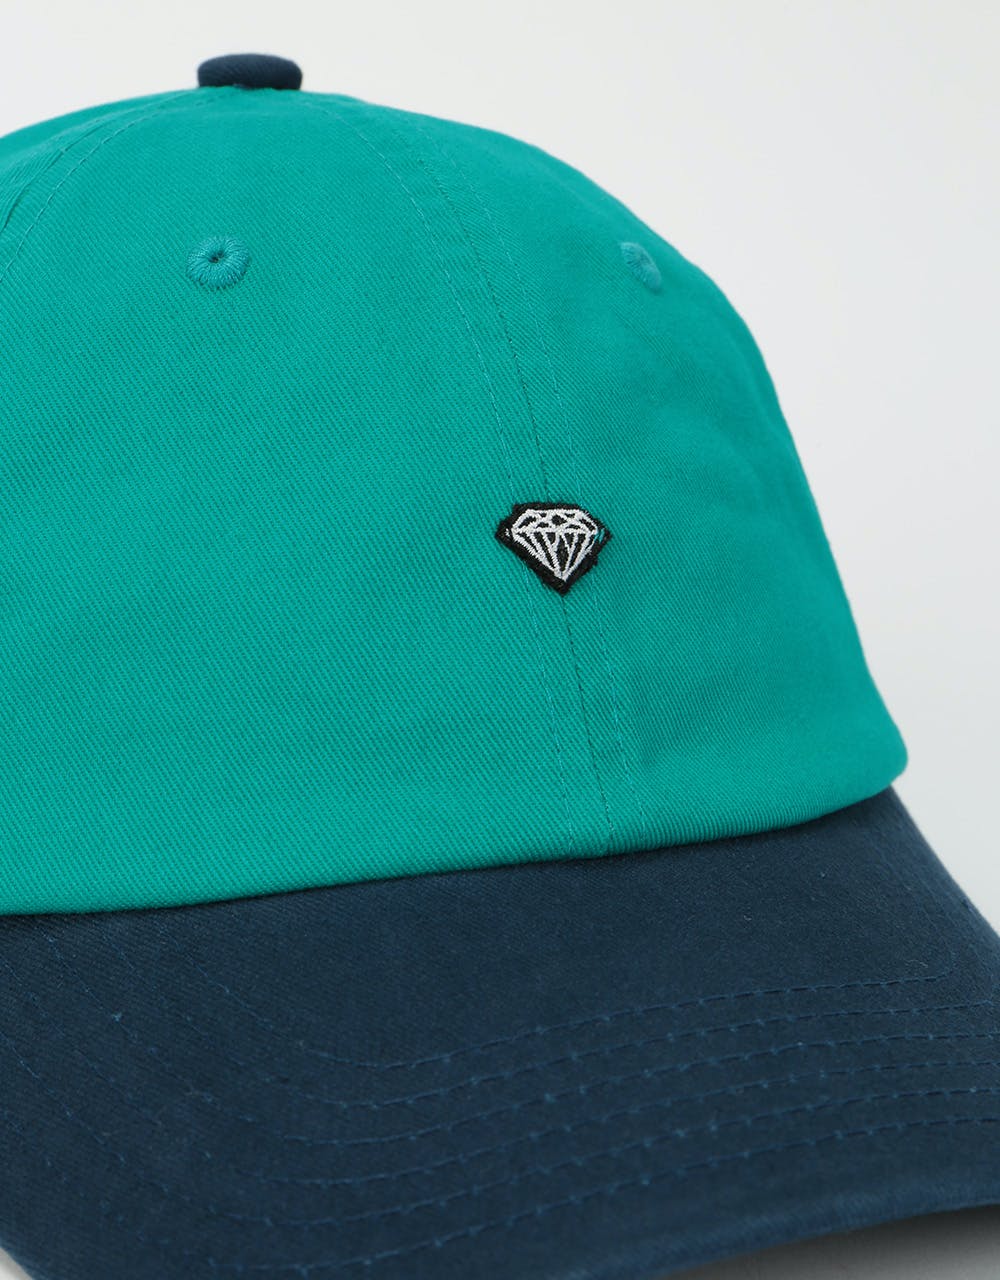 Diamond Supply Co. Brilliant Patch Sports Cap - Teal